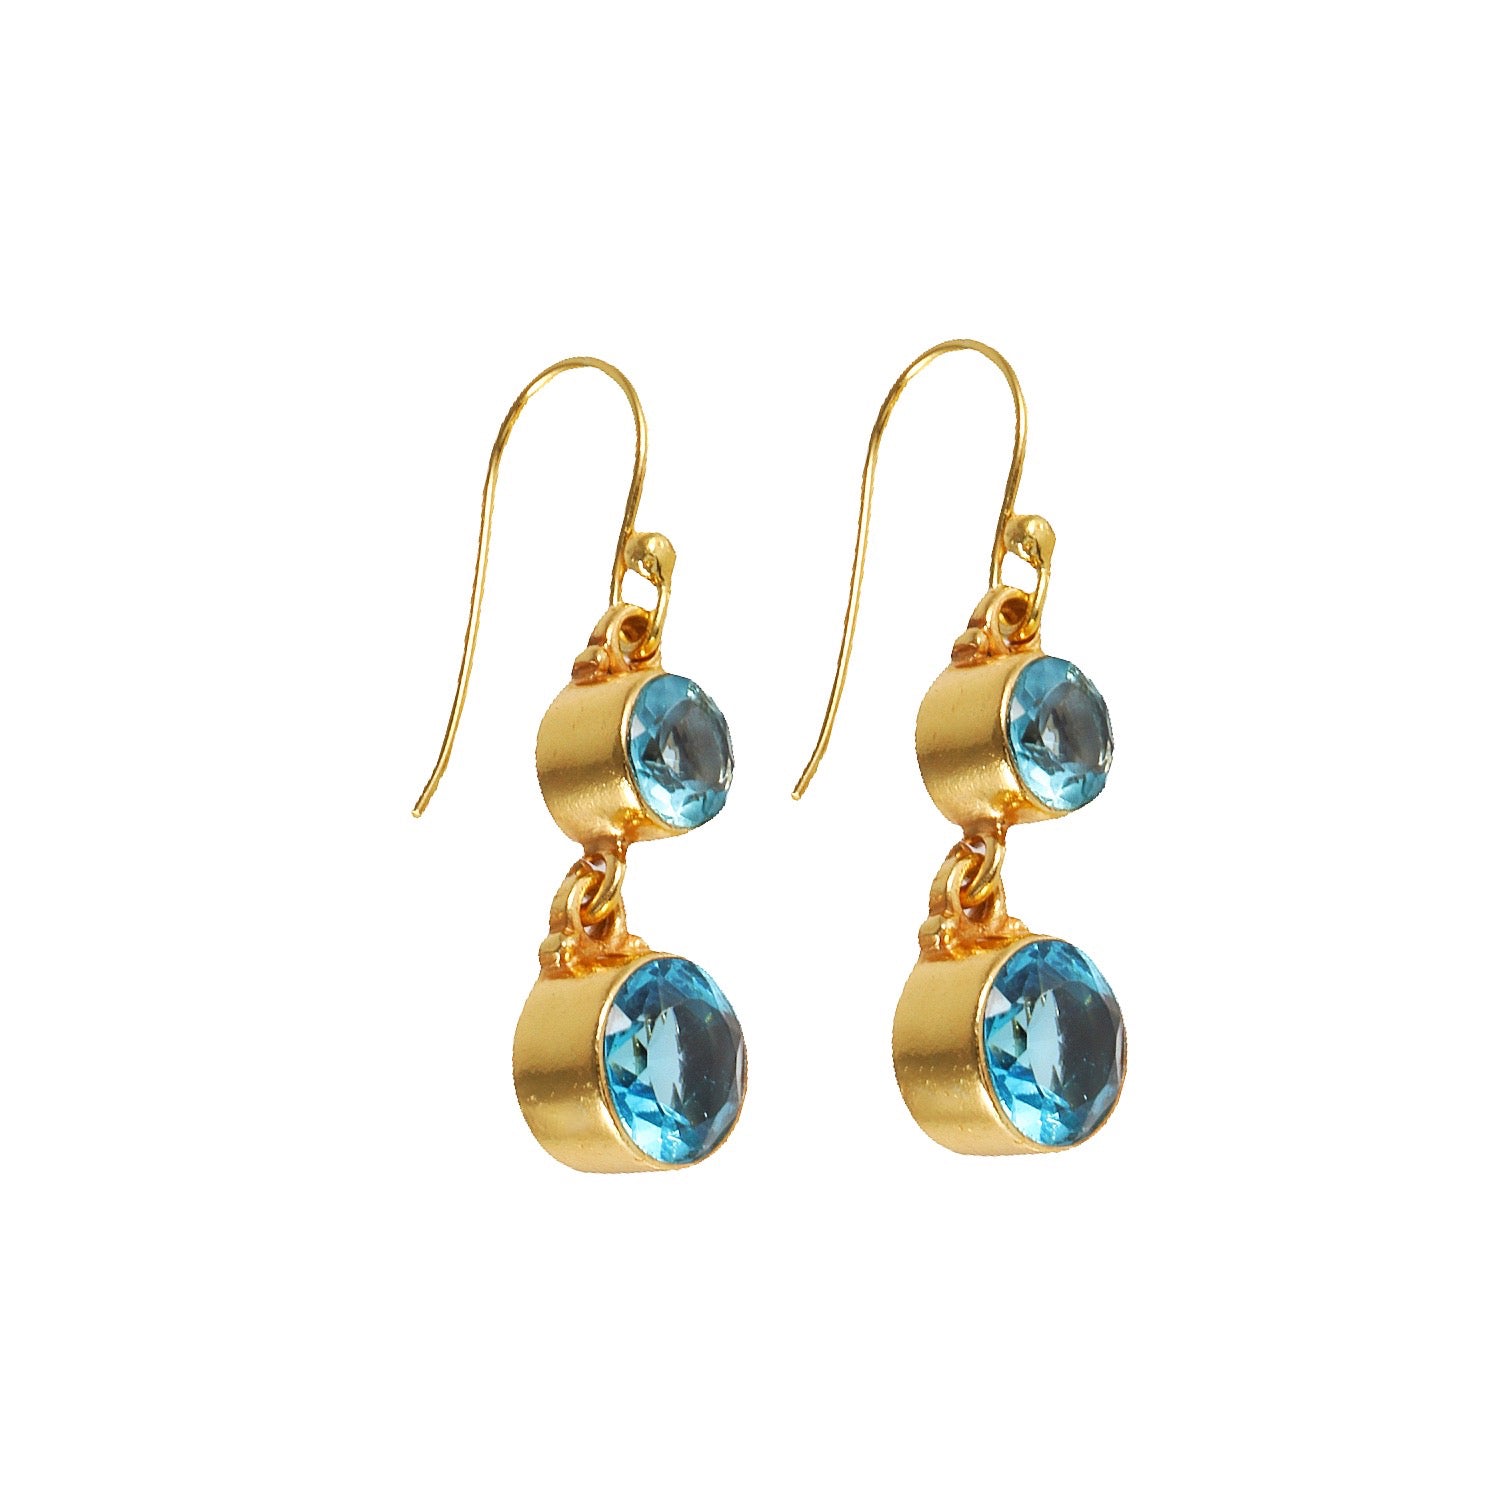 INDIA HANDCRAFTED EARRING WITH BLUE TOPAZ GEMSTONE